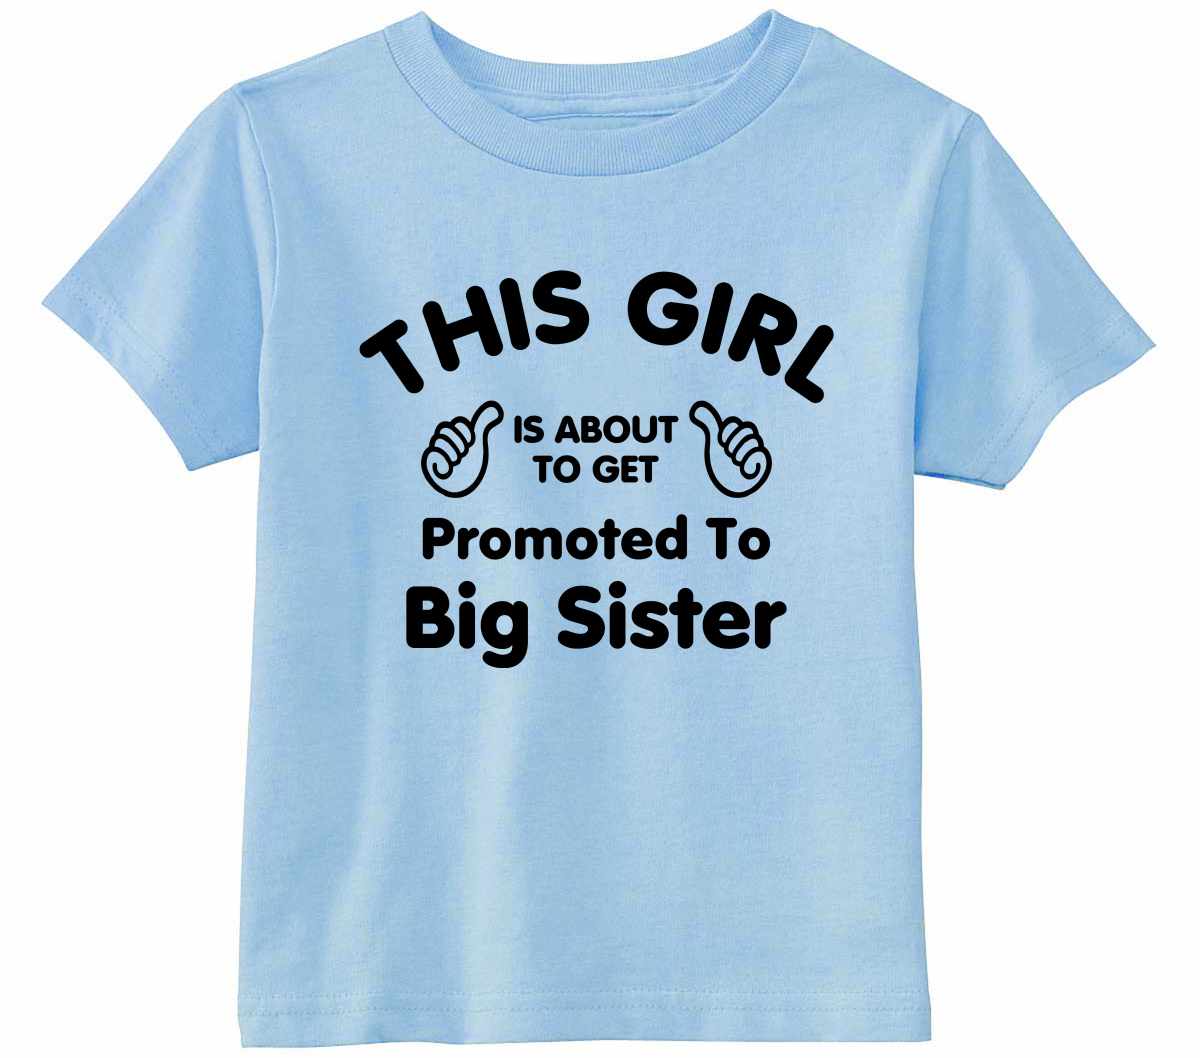 This Girl is About To Get Promoted To Big Sister Infant/Toddler  (#1082-7)